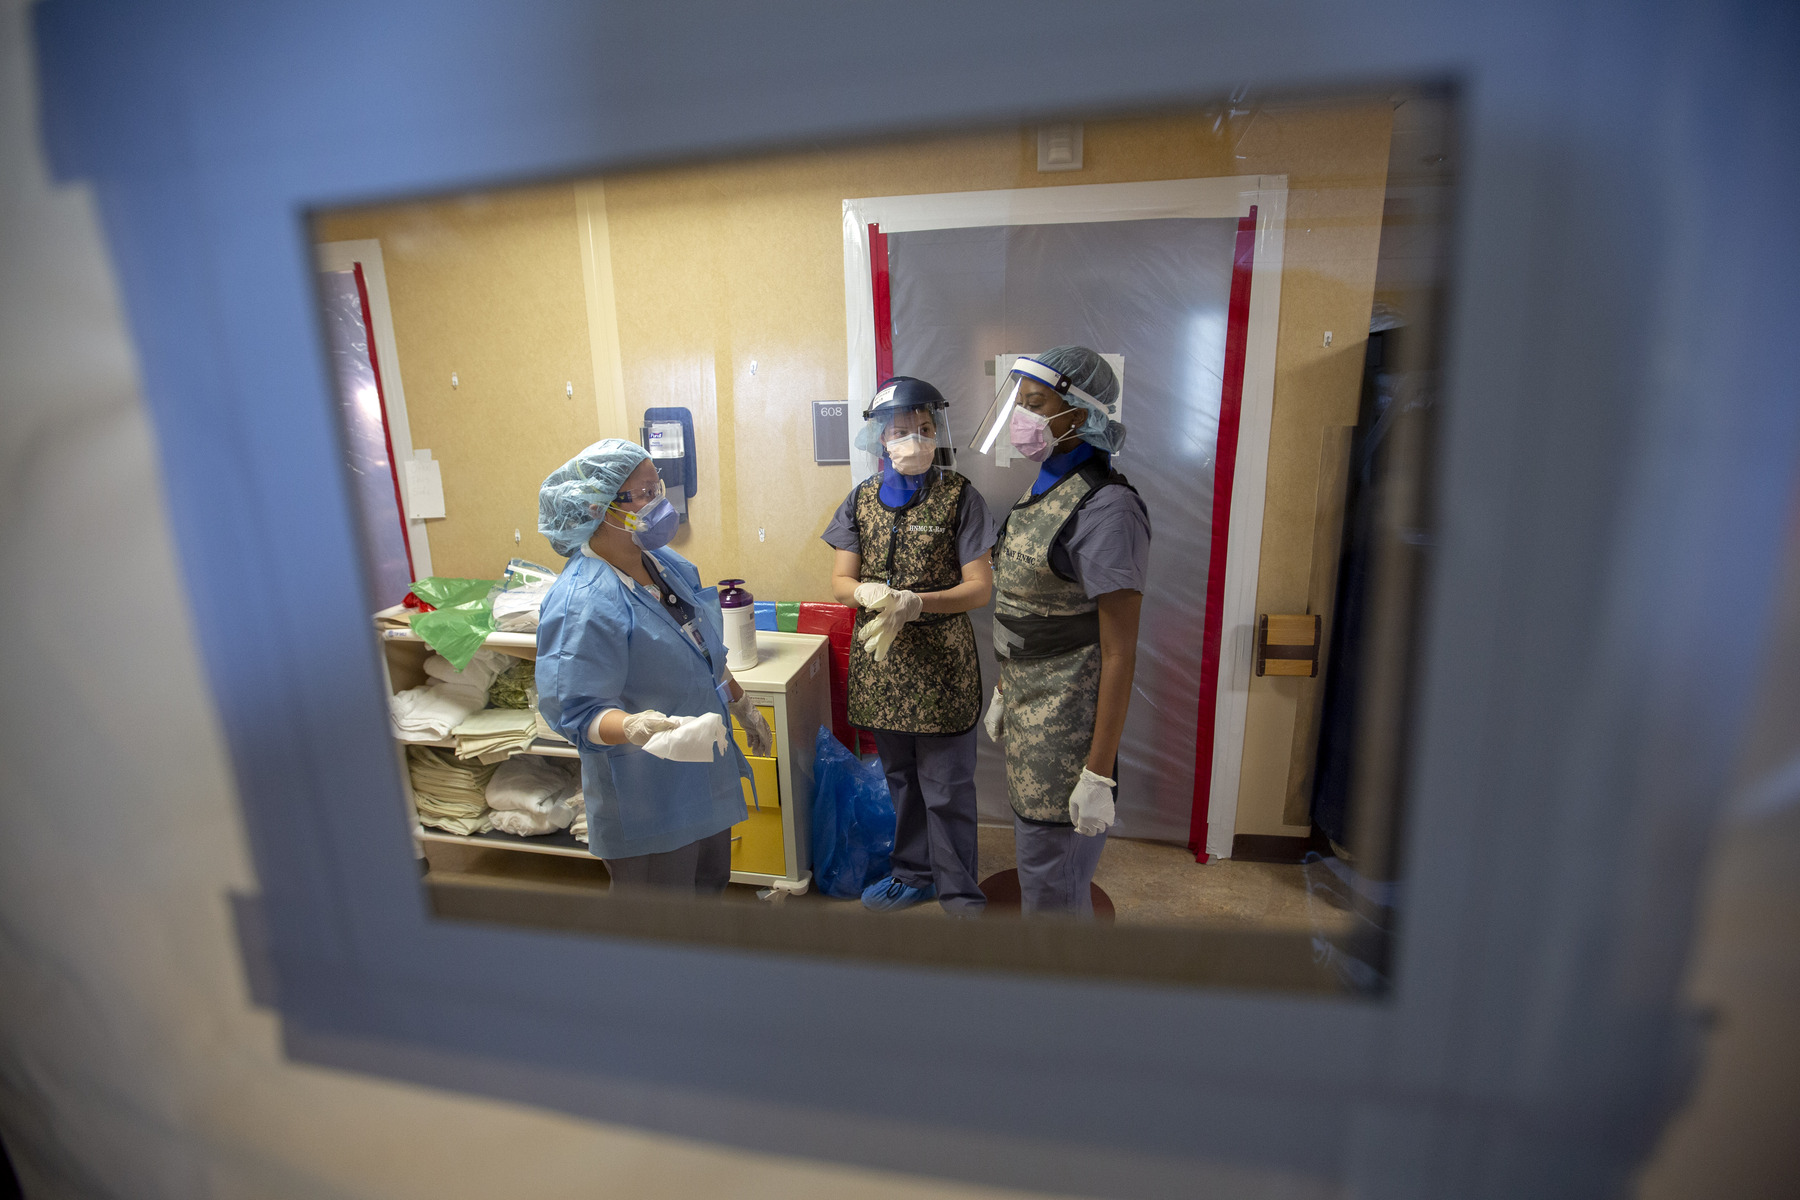 X-Ray technologists donning PPE, seen through a plastic doorway, during the COVID-19 Pandemic at Holy Name Medical Center in Teaneck, New Jersey. 03/19/2020. Photo by Jeff Rhode/Holy Name Medical Center